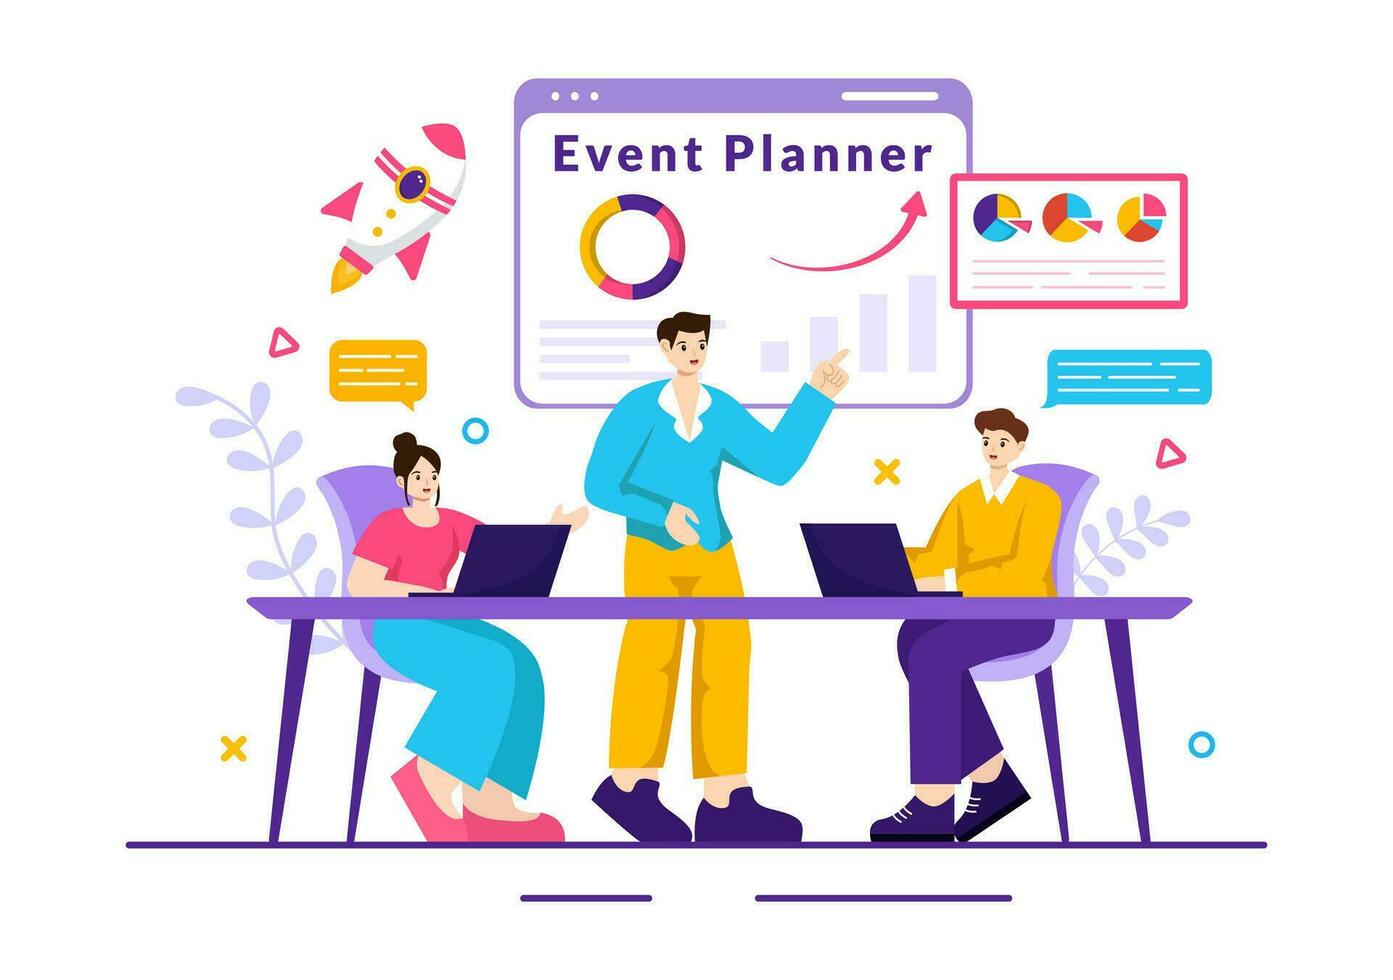 Event Planner Vector Illustration with Planning Schedule, Time Management, Business Agenda and Calendar Concept in Flat Cartoon Background